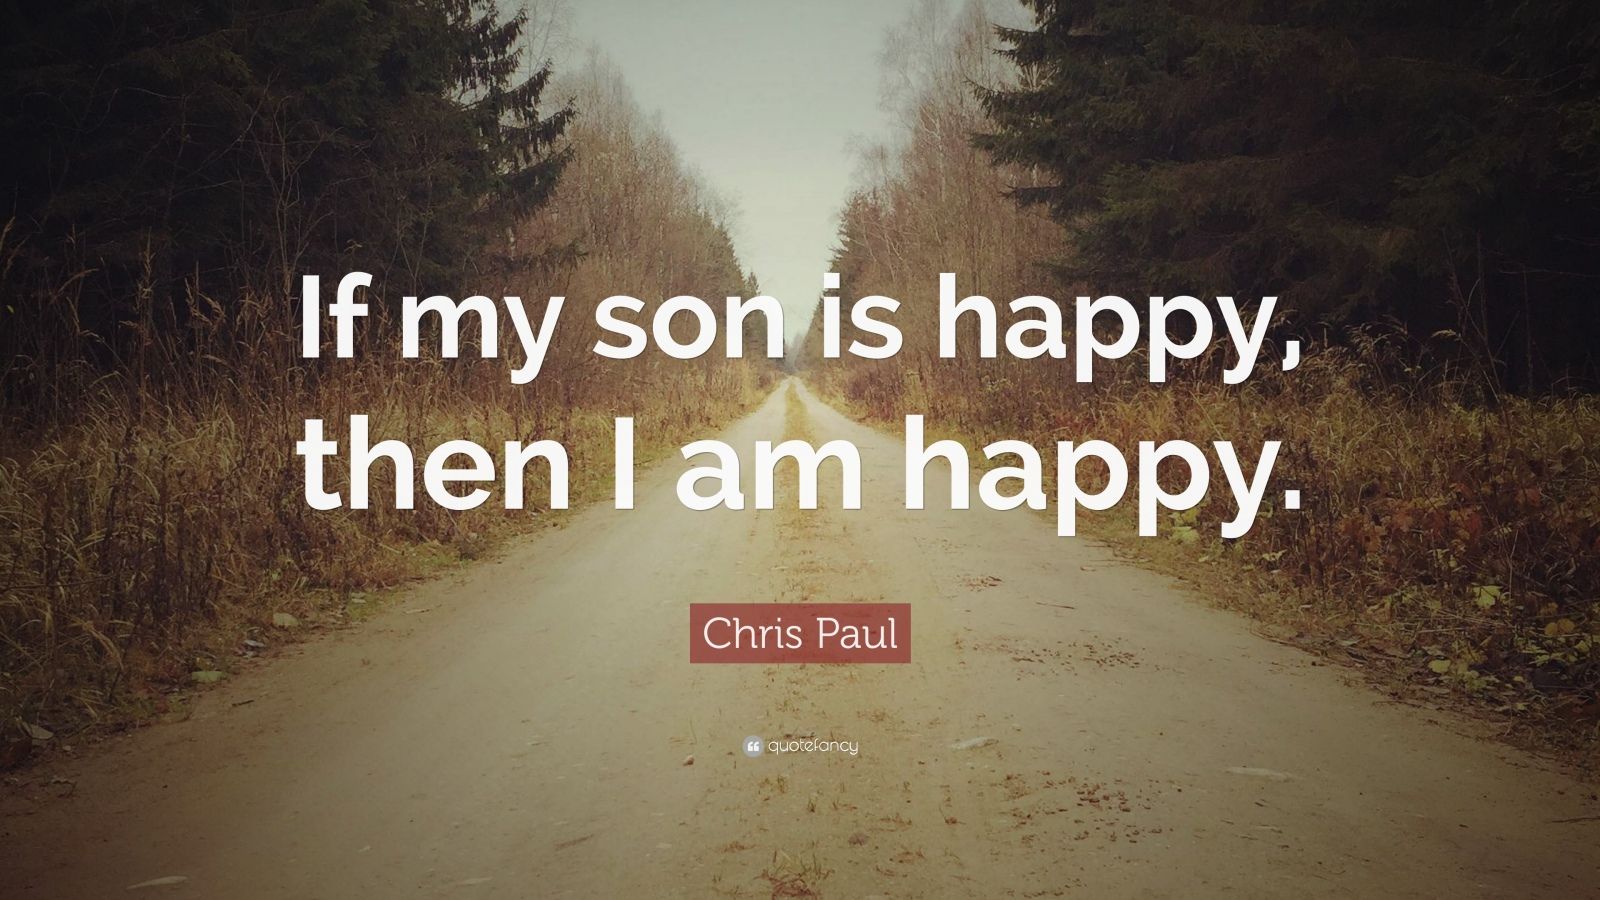 Chris Paul Quote: "If my son is happy, then I am happy ...